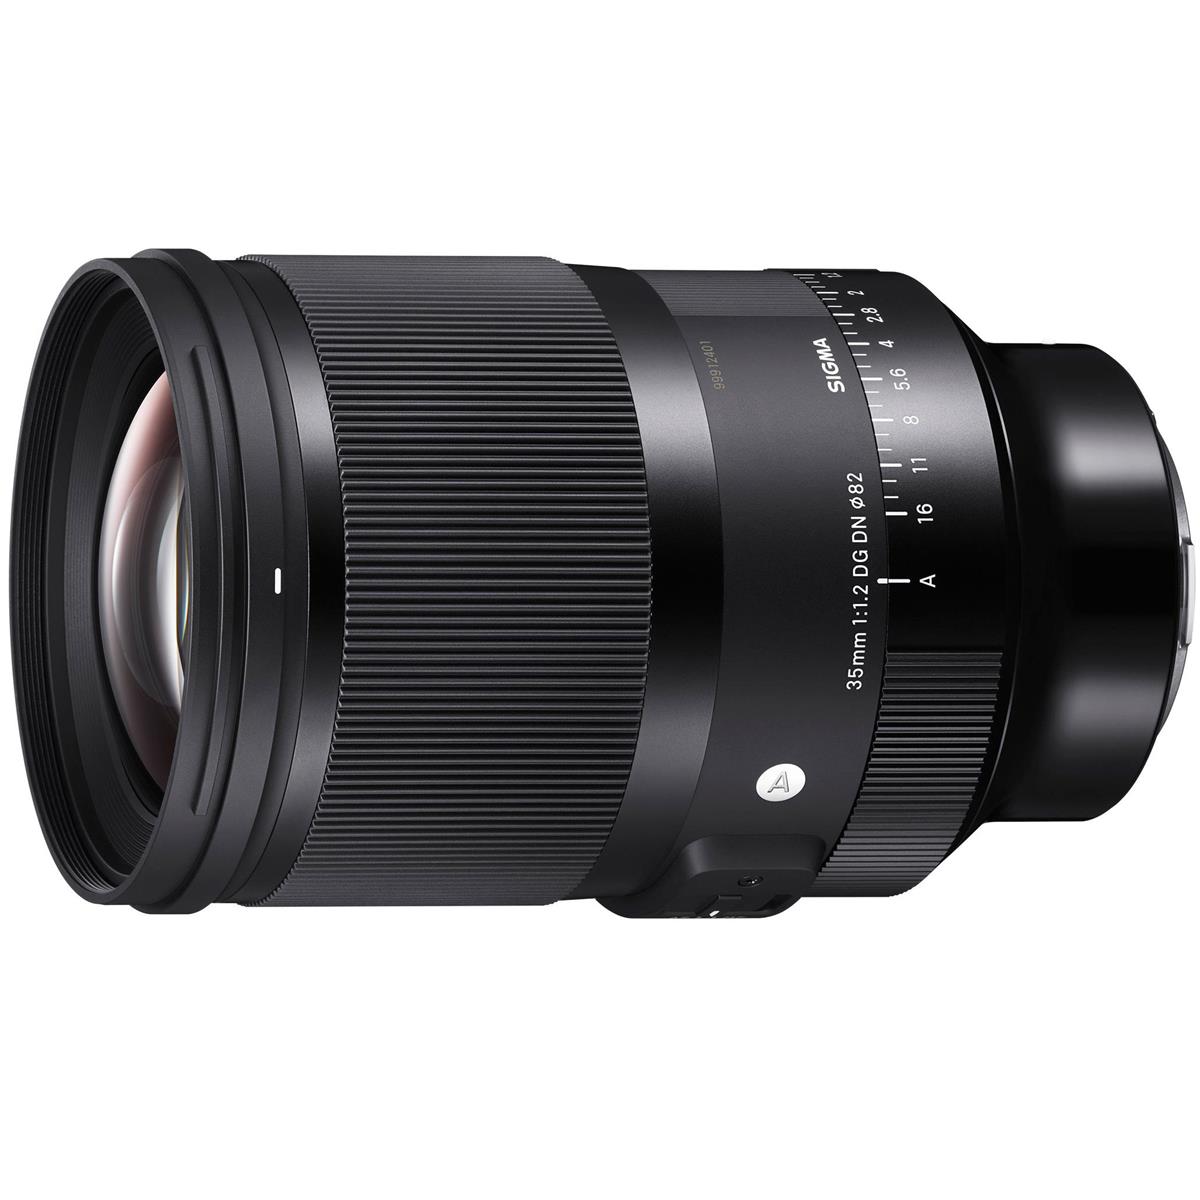 The Sigma 35mm F1.2 DG DN Art Lens Is Real, and So Are Others!